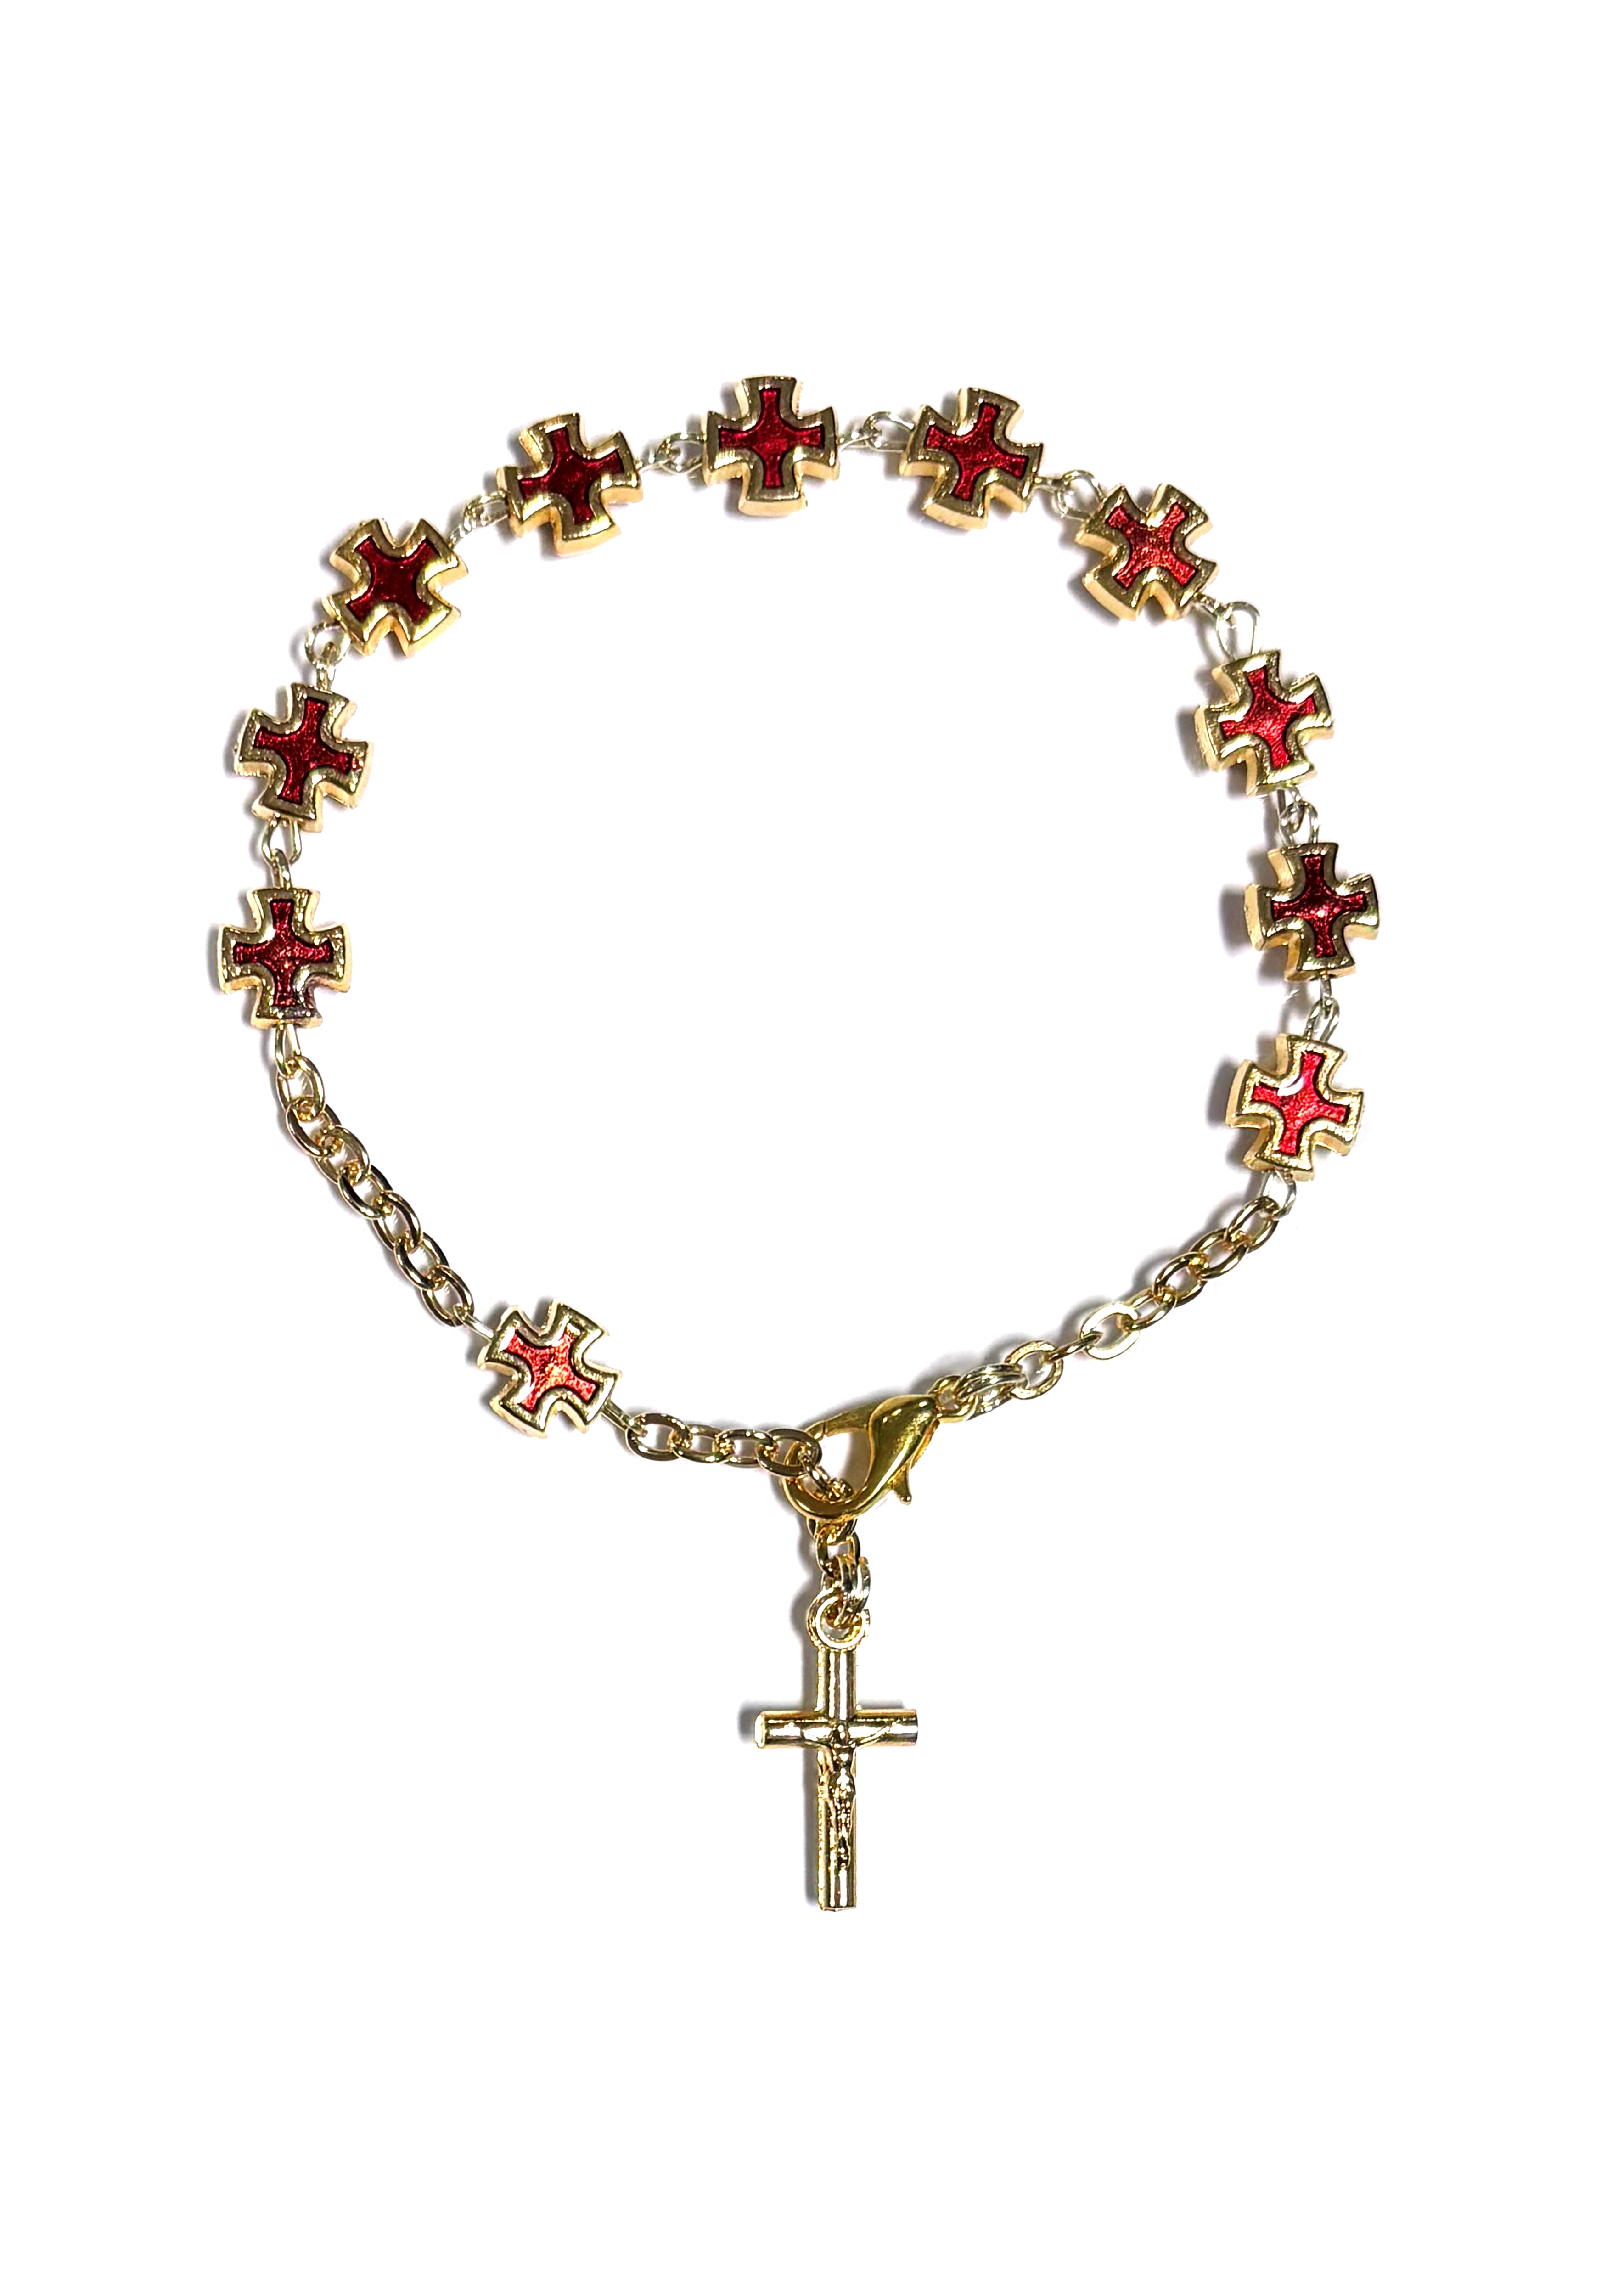 Gold plated and red enamel cross bracelet